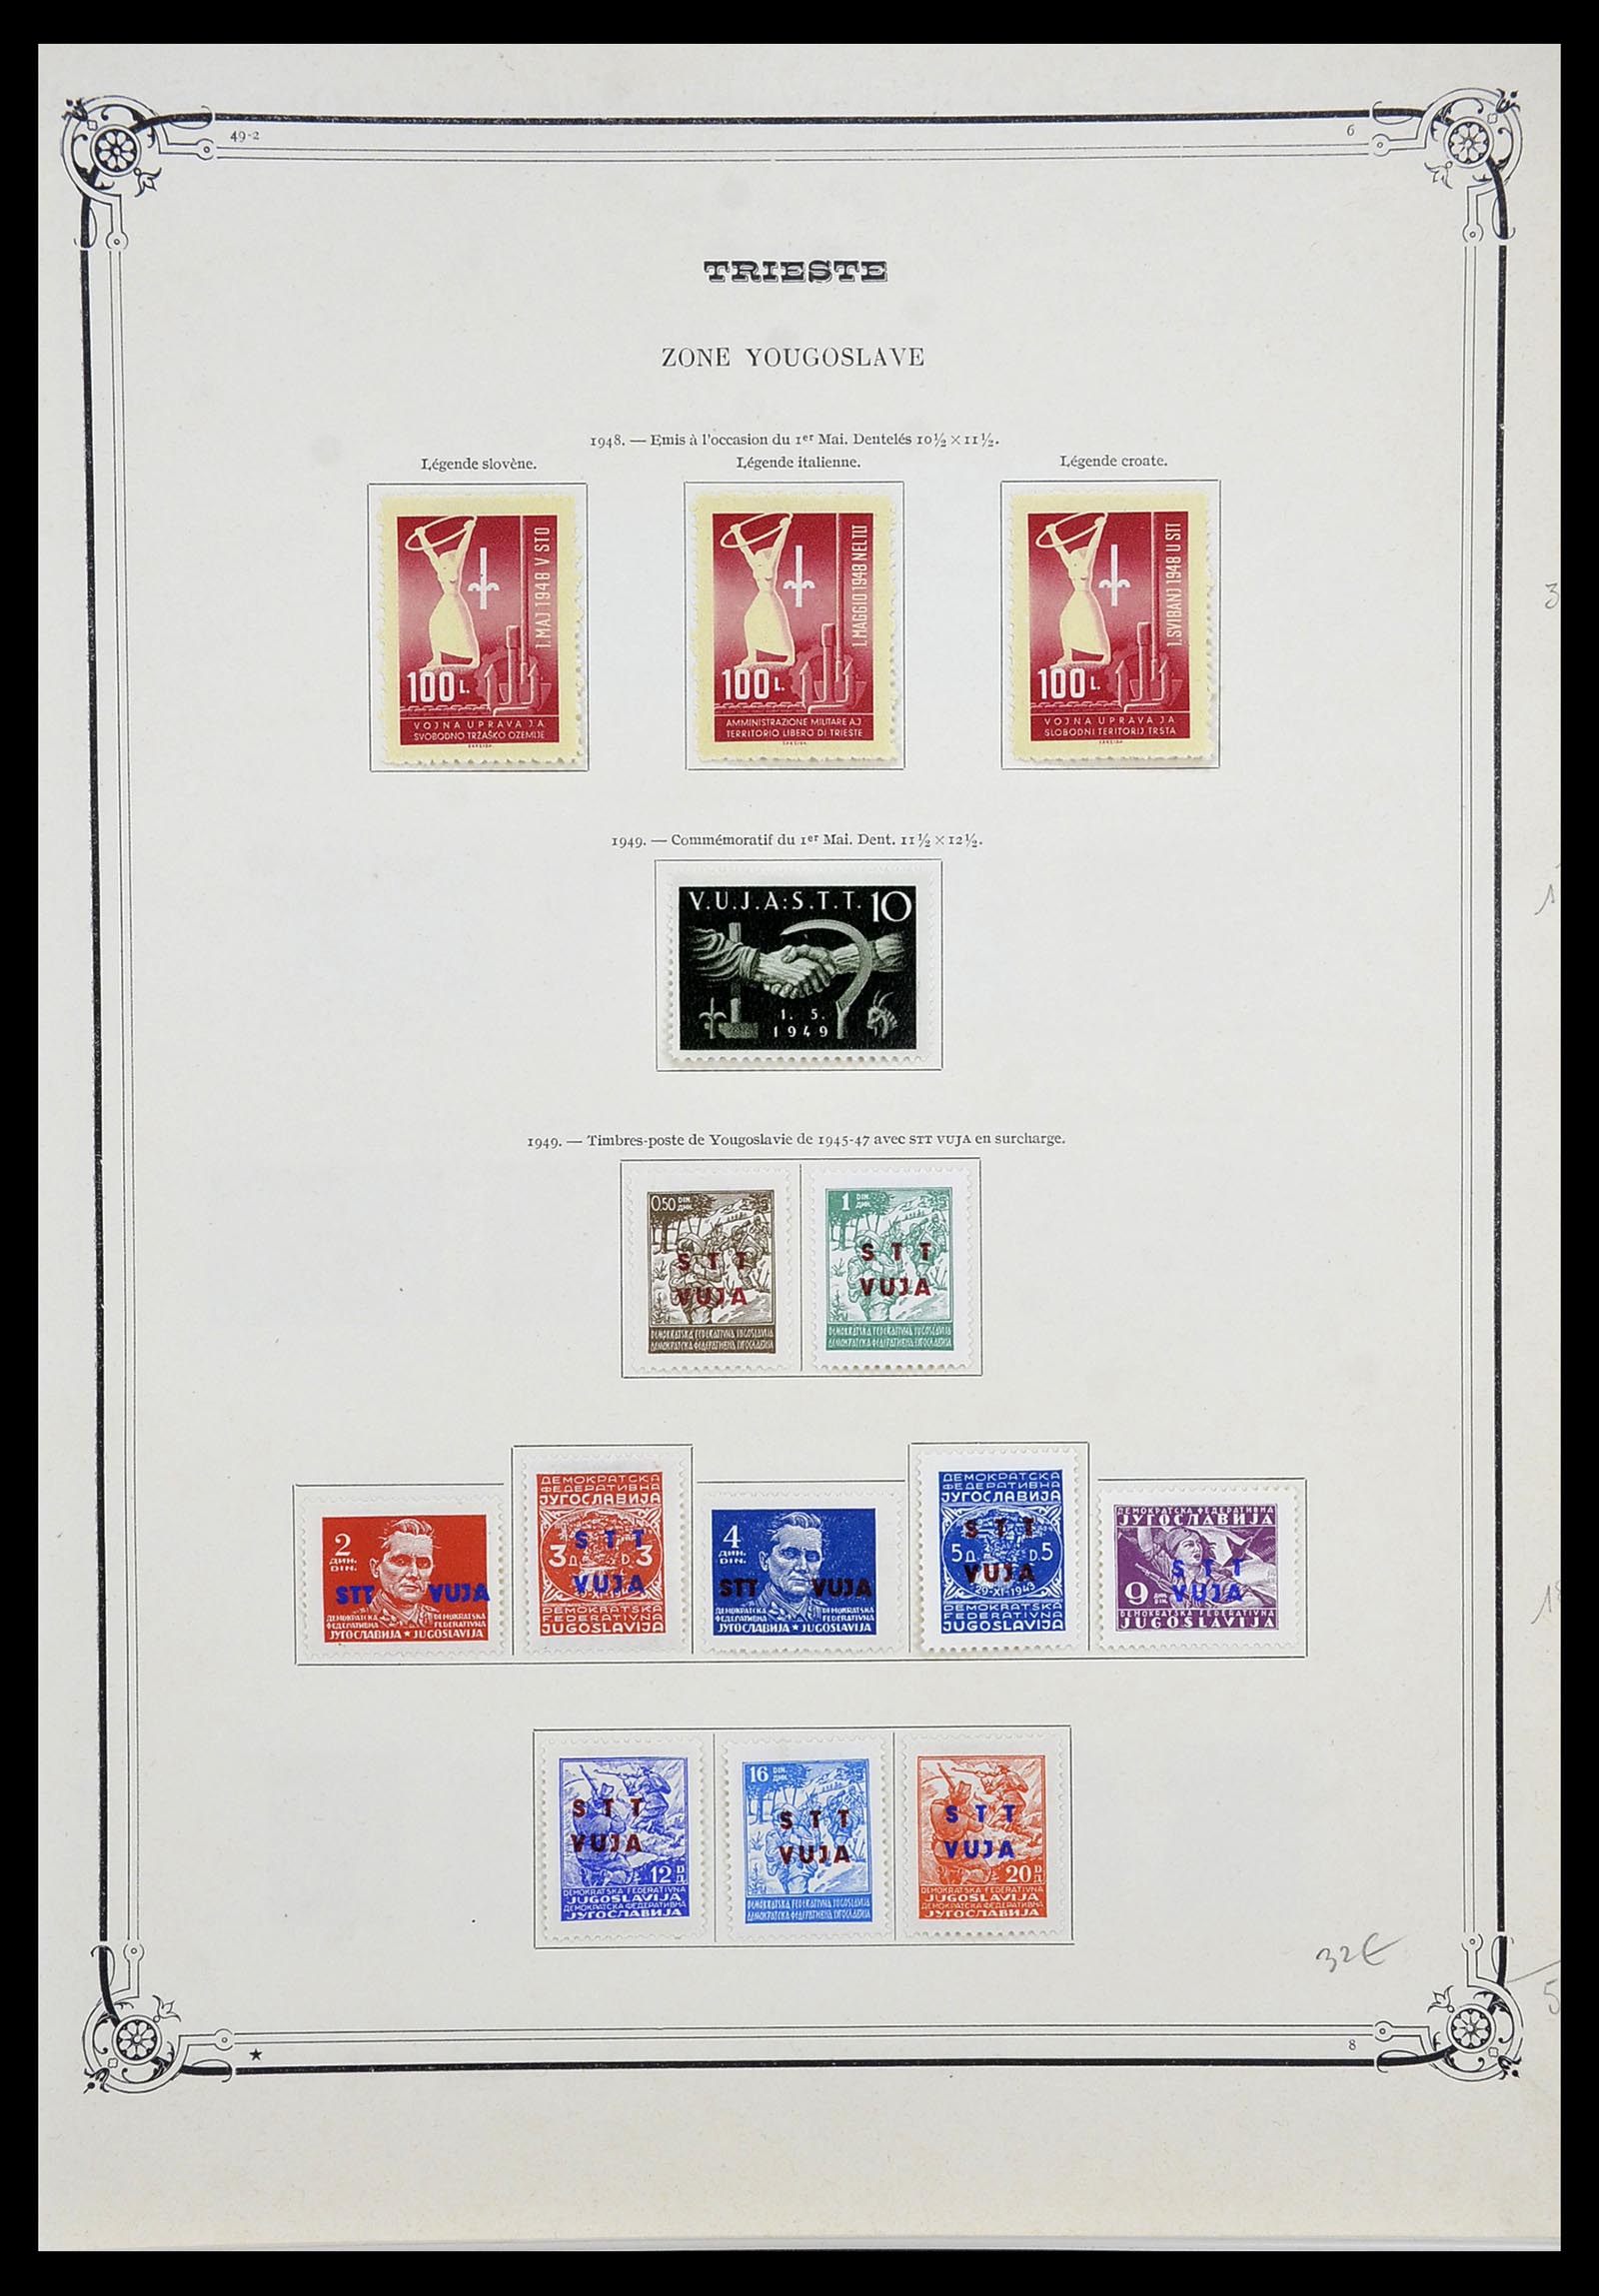 34277 001 - Stamp collection 34277 Triest zone B 1948-1954.